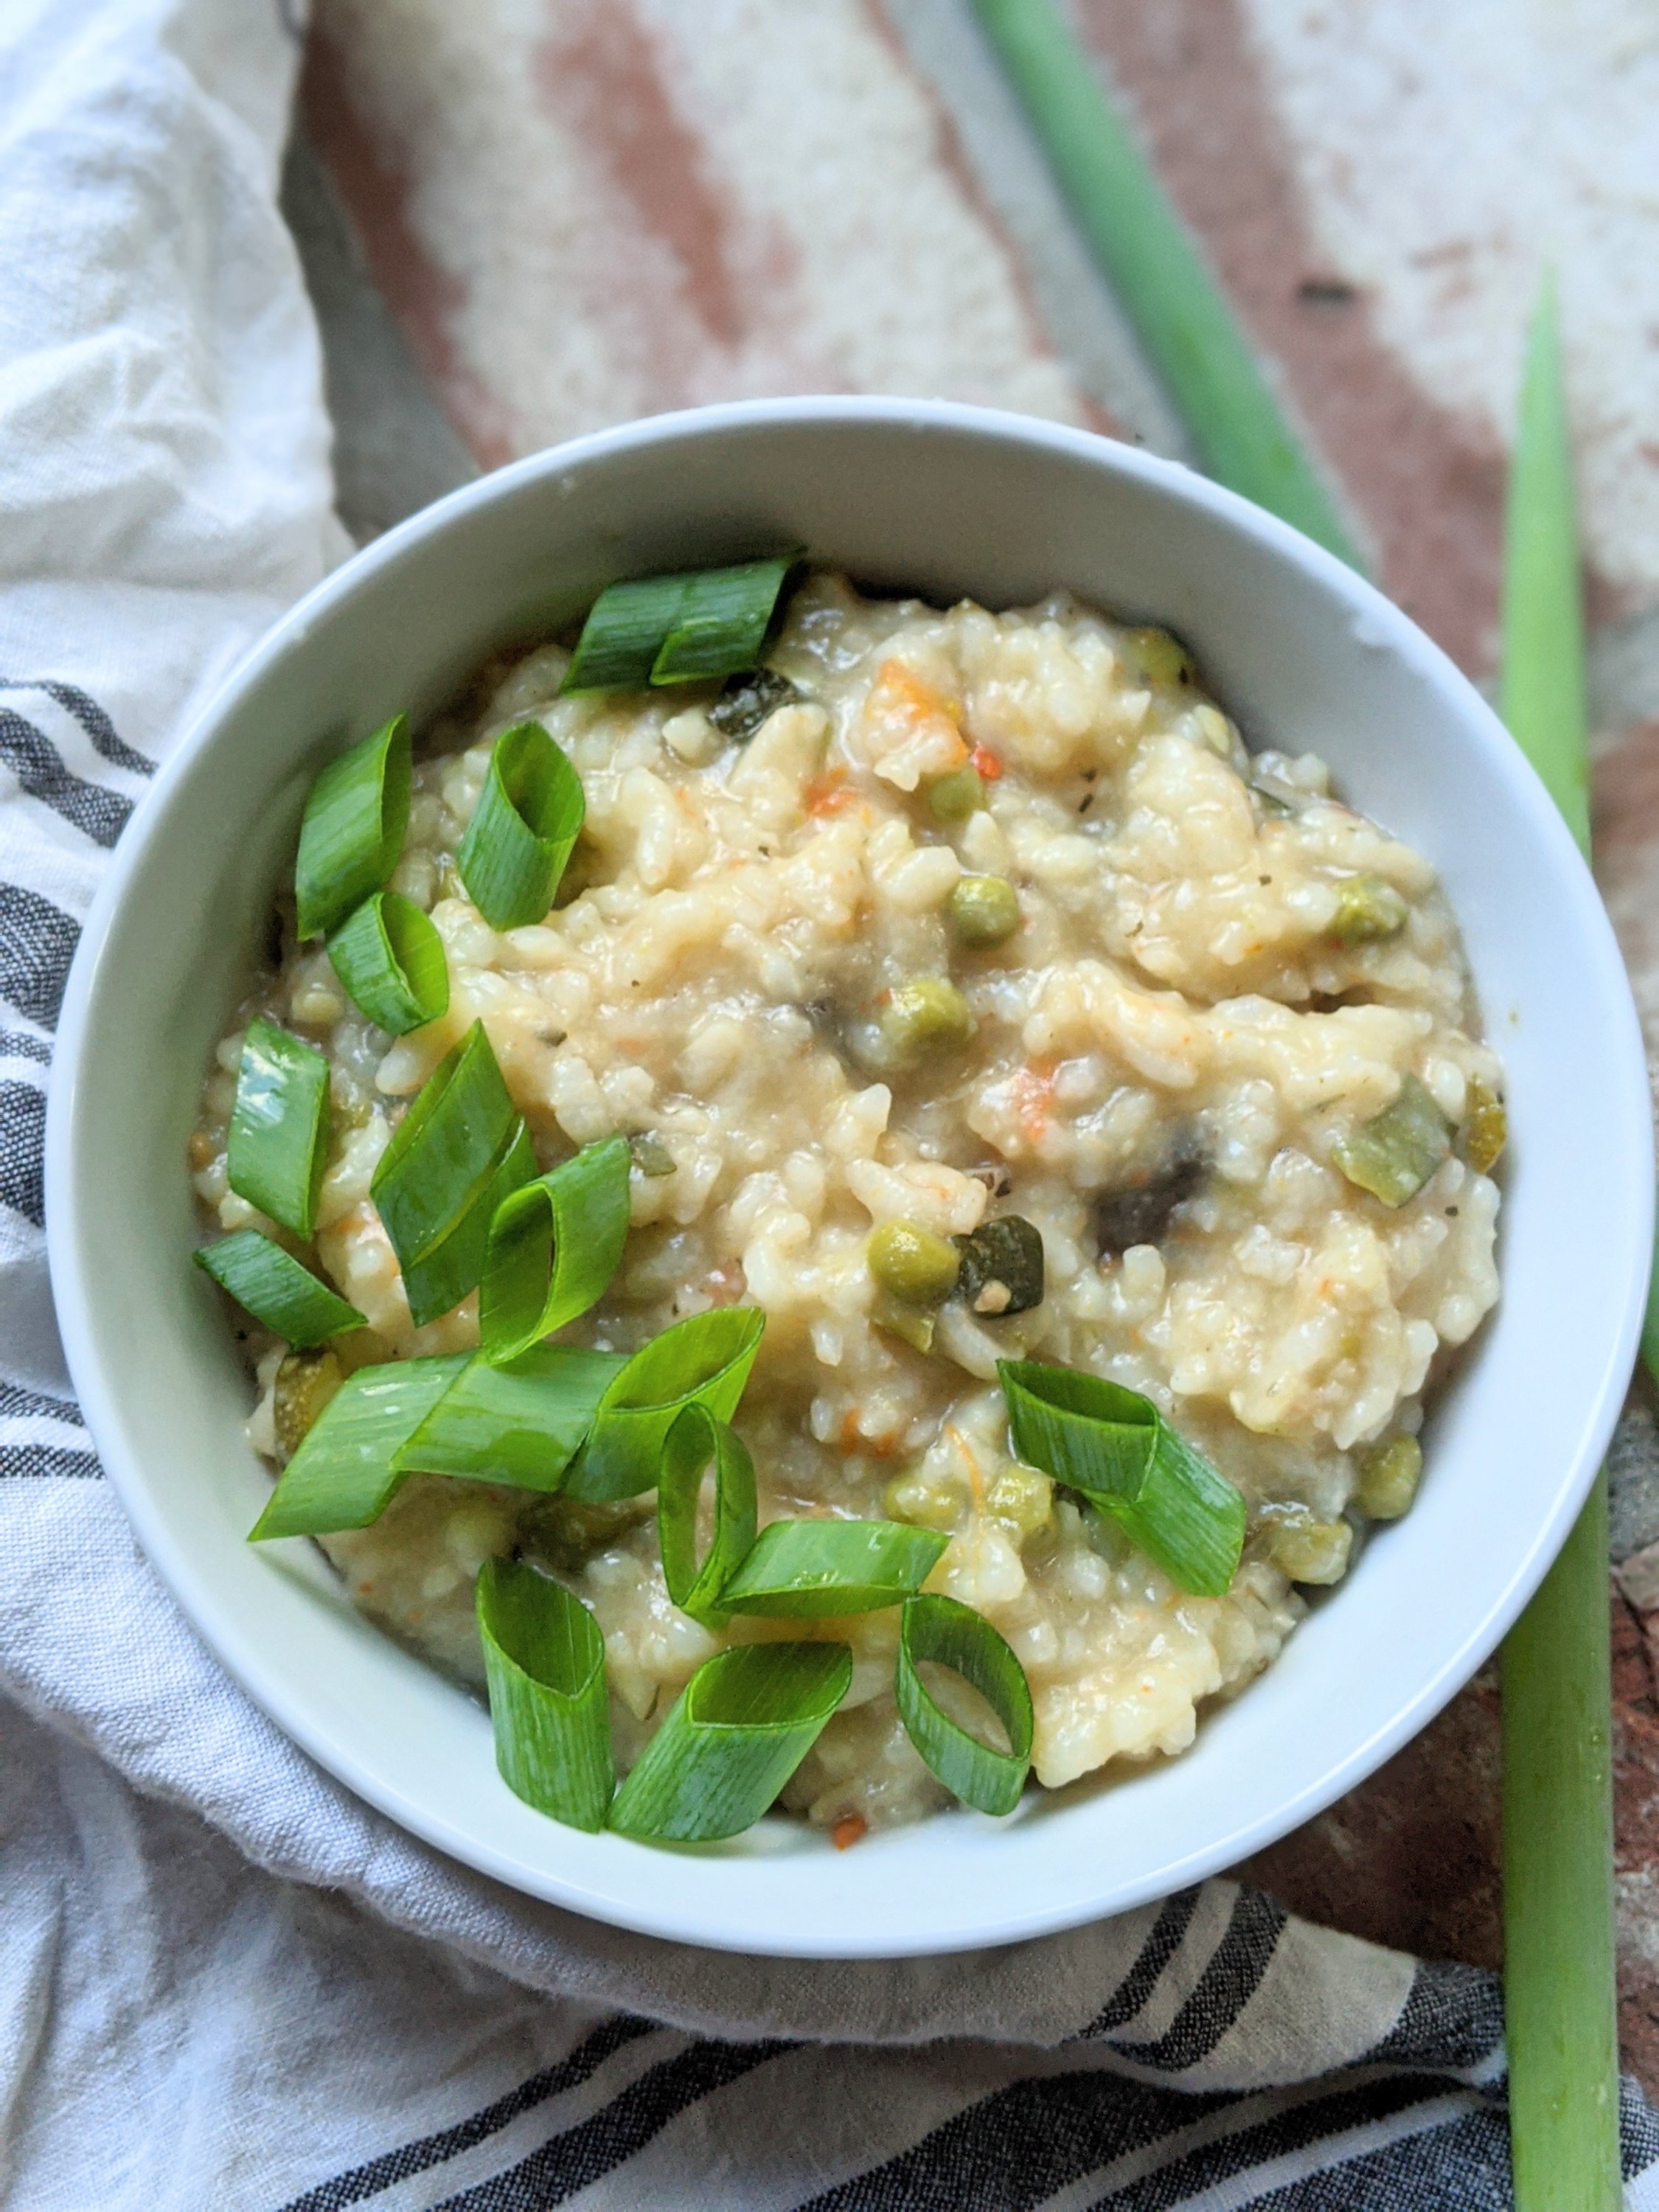 vegan instant pot risotto recipes healthy plant based arborio rice dishes easy no stir risotto set it and forget it risotto recipes no stuck no burn no stove top rice